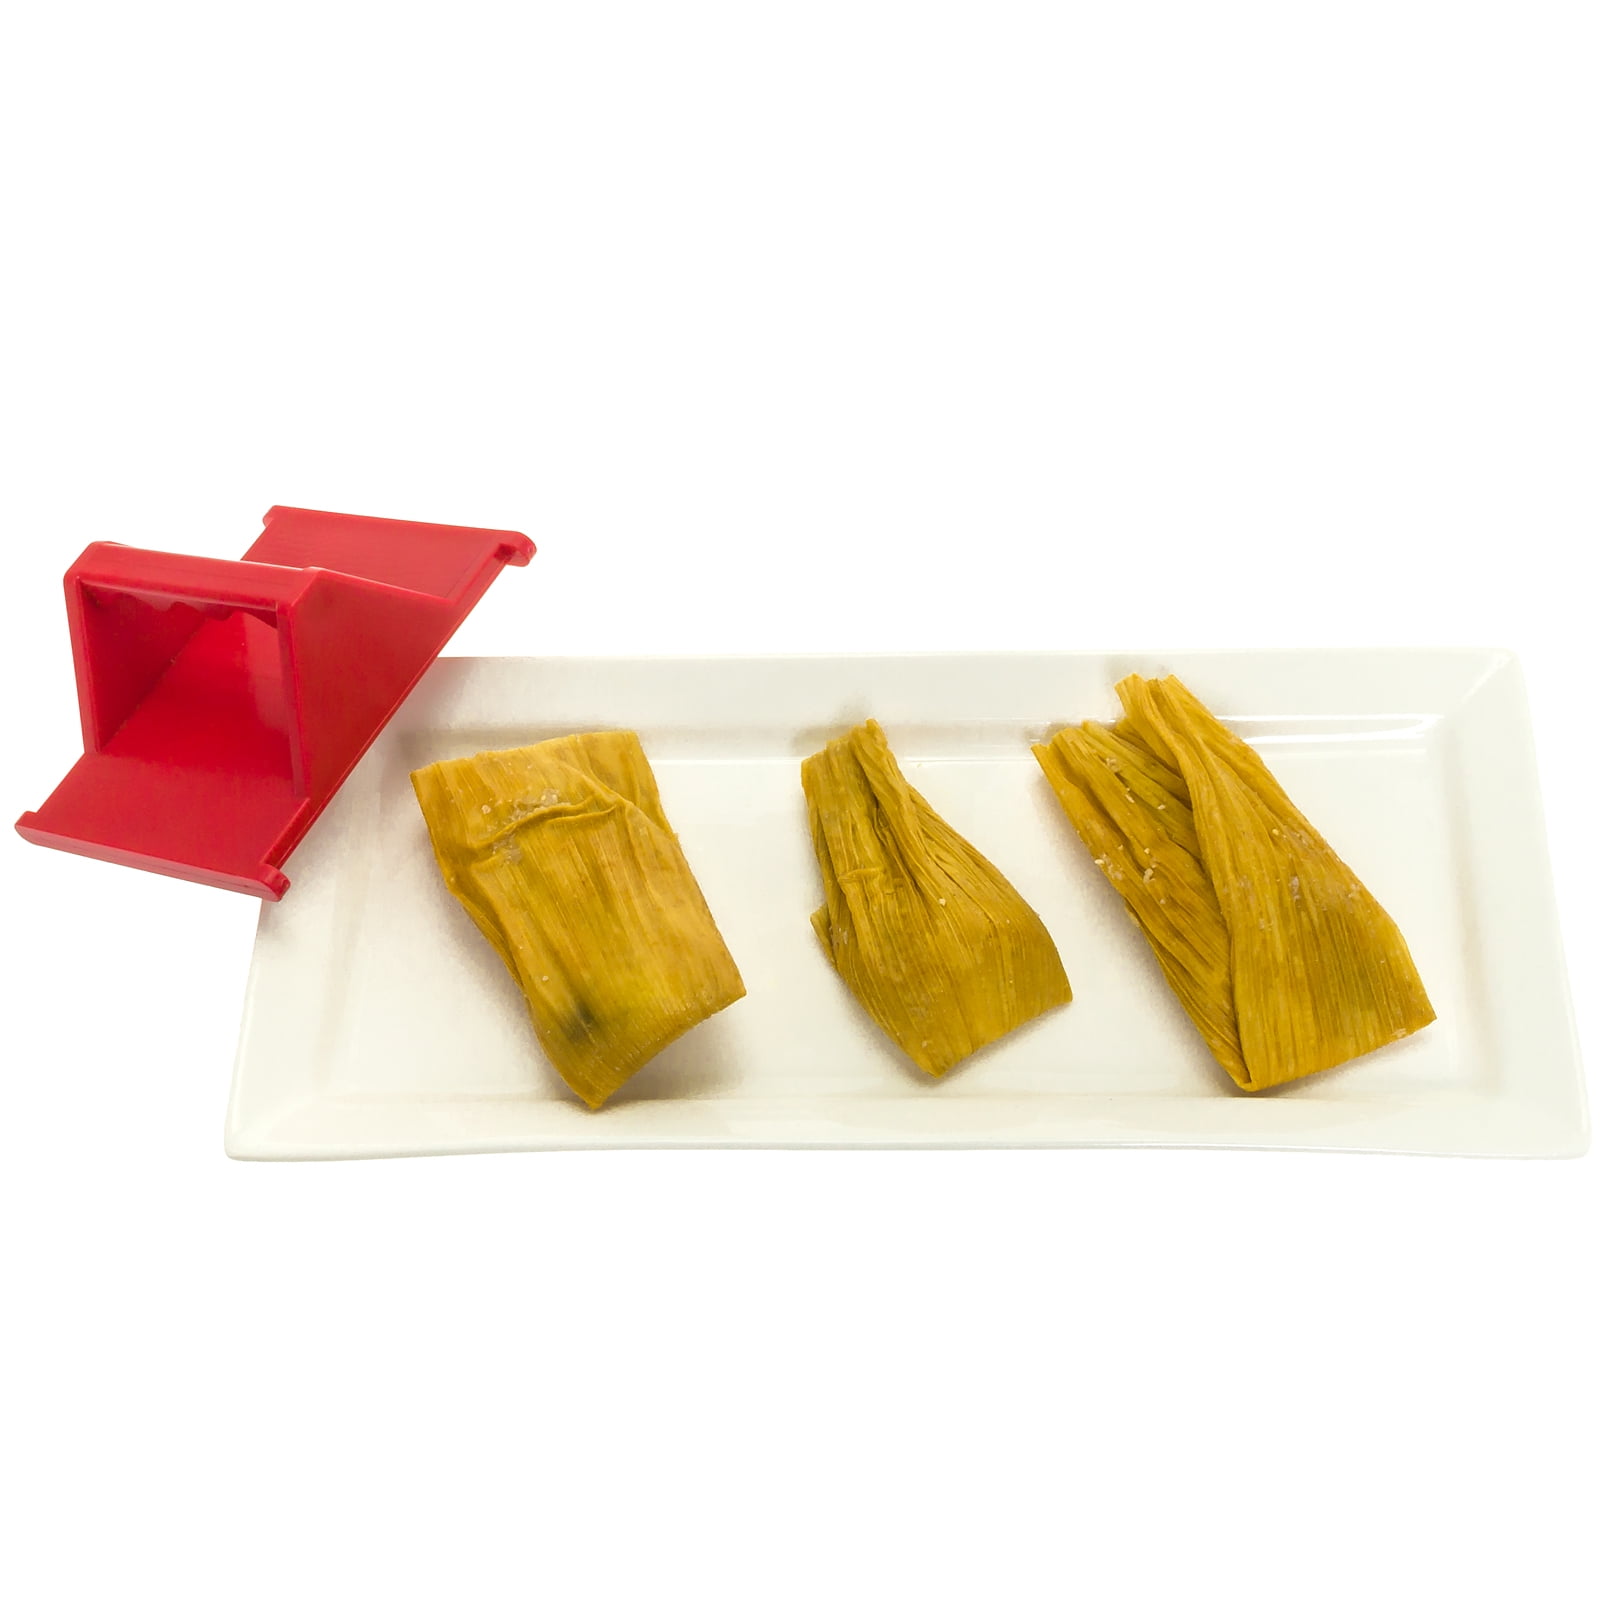 Tamales Masa Spreader, 2 Pack, Can be white, red, black or green: Home &  Kitchen 